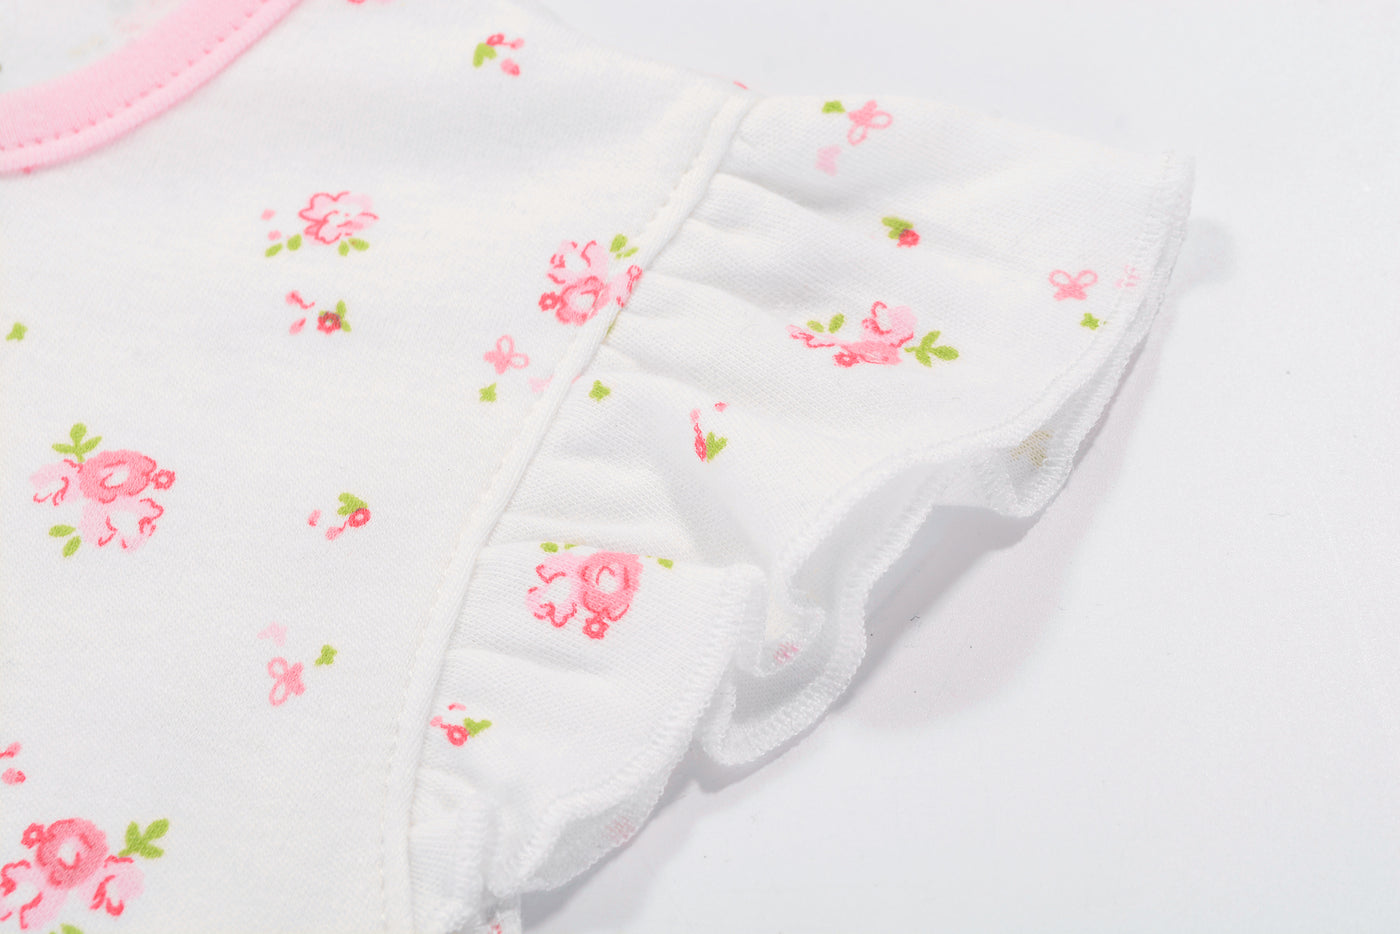 Baby Girl Romper Rose Prints w Embroidered Pink Whale - Little Kooma